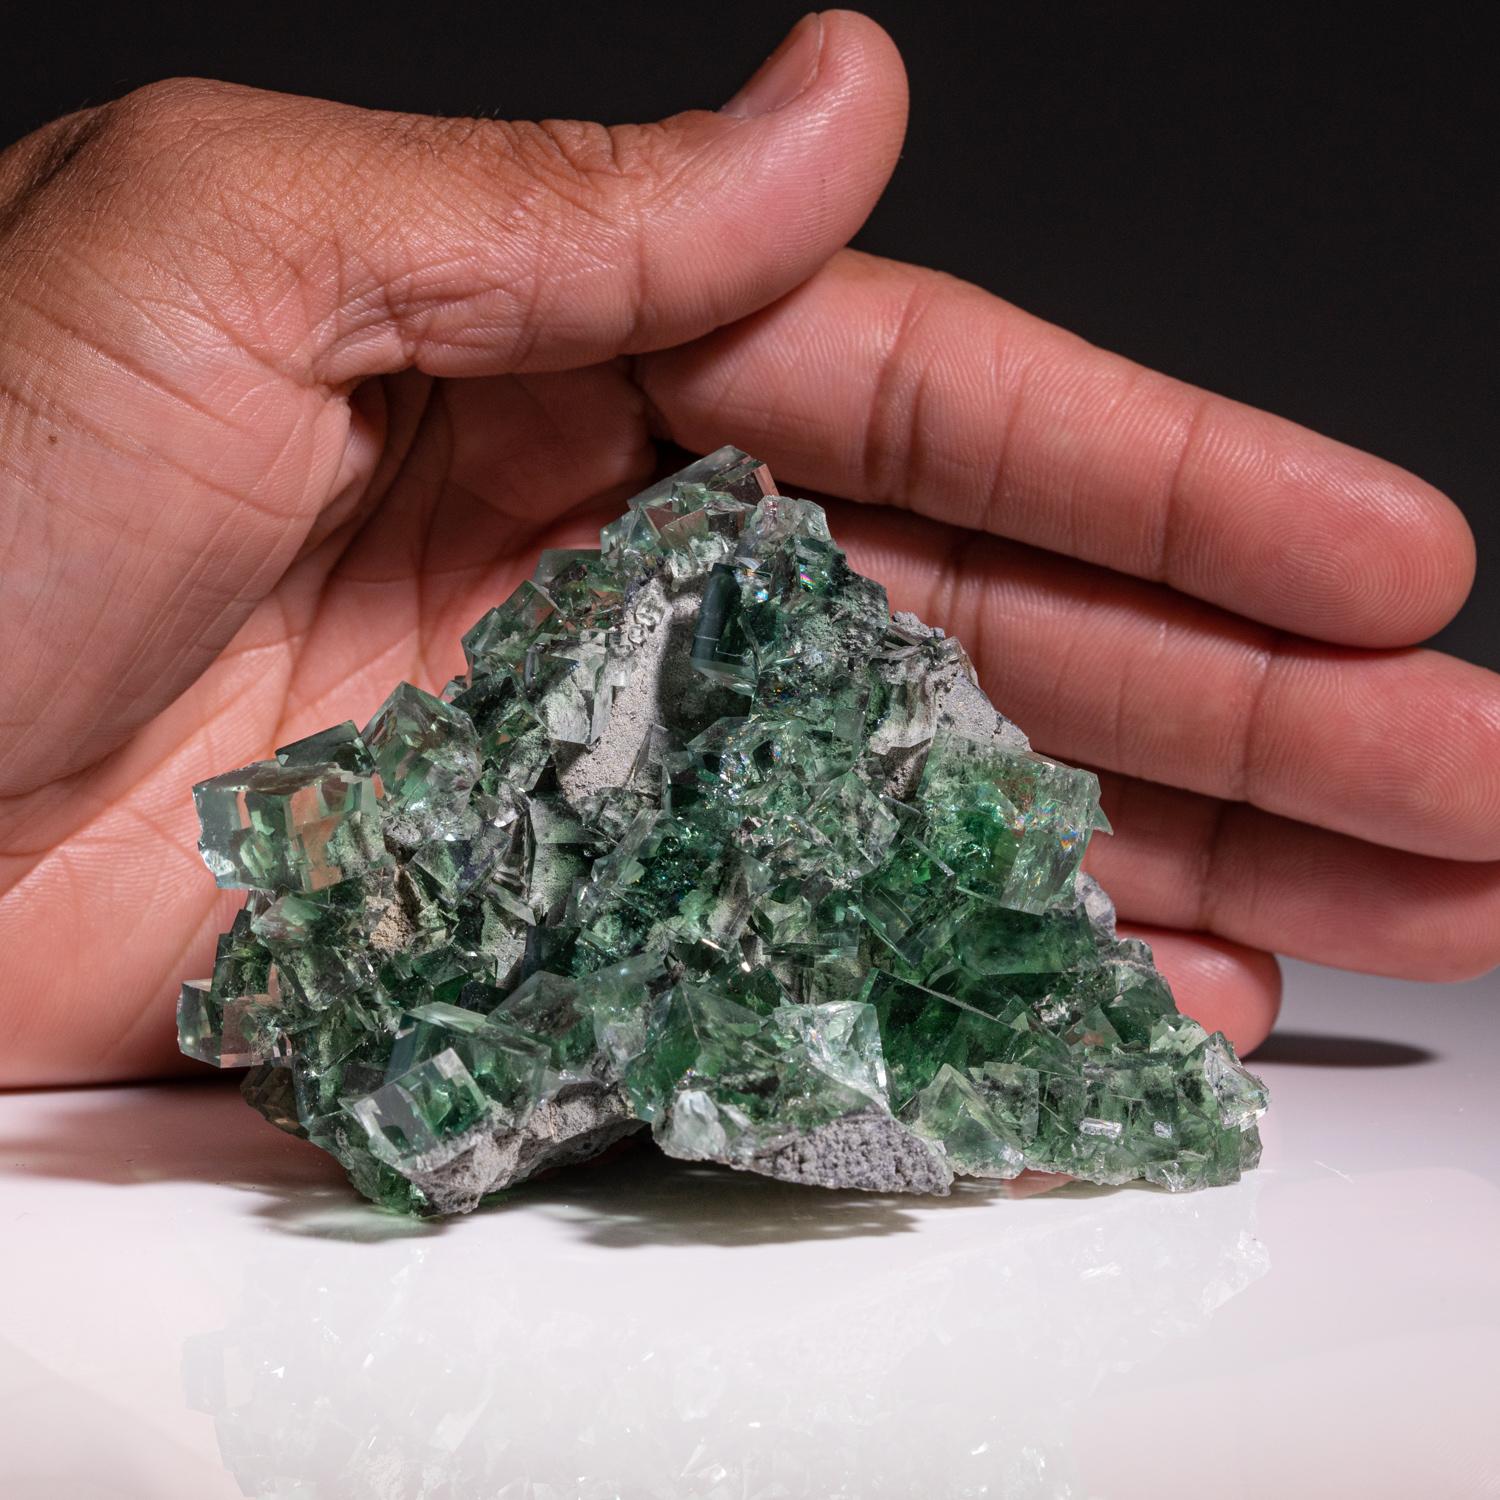 From Yaogangxian Mine, Nanling Mountains, Hunan Province, China  

Internally clear transparent crystal cluster of vivid green cubic fluorite crystals on matrix. The matrix is clearly visible through the crystals due to clear transparency. The